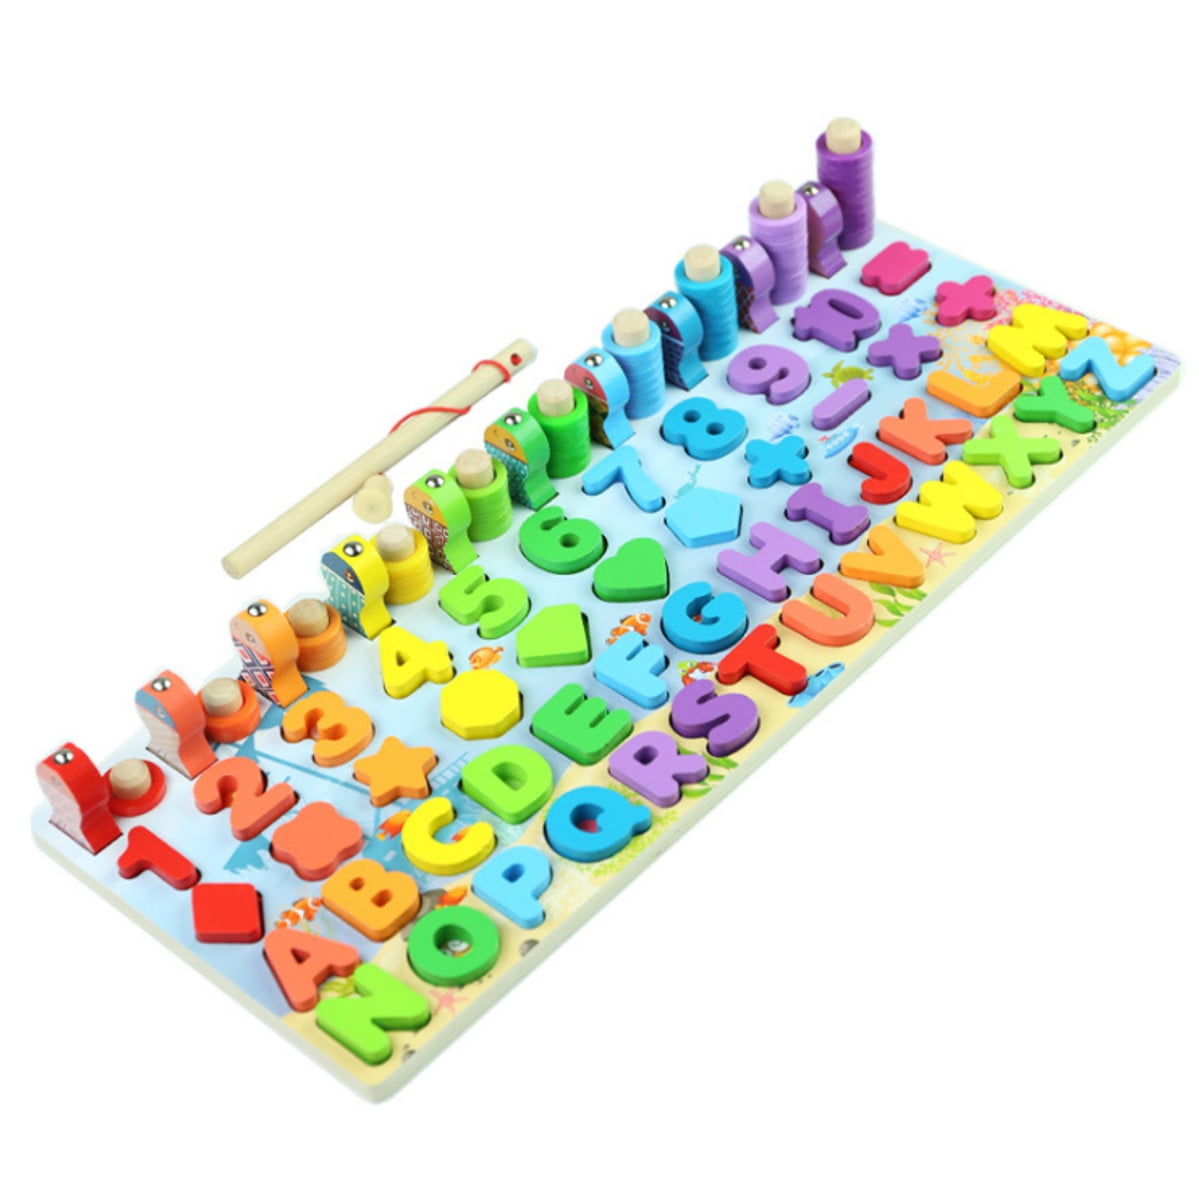 Wooden Animal//Shapes//Letters//Numbers Shapes Puzzles Jigsaws Kid Educational Toys